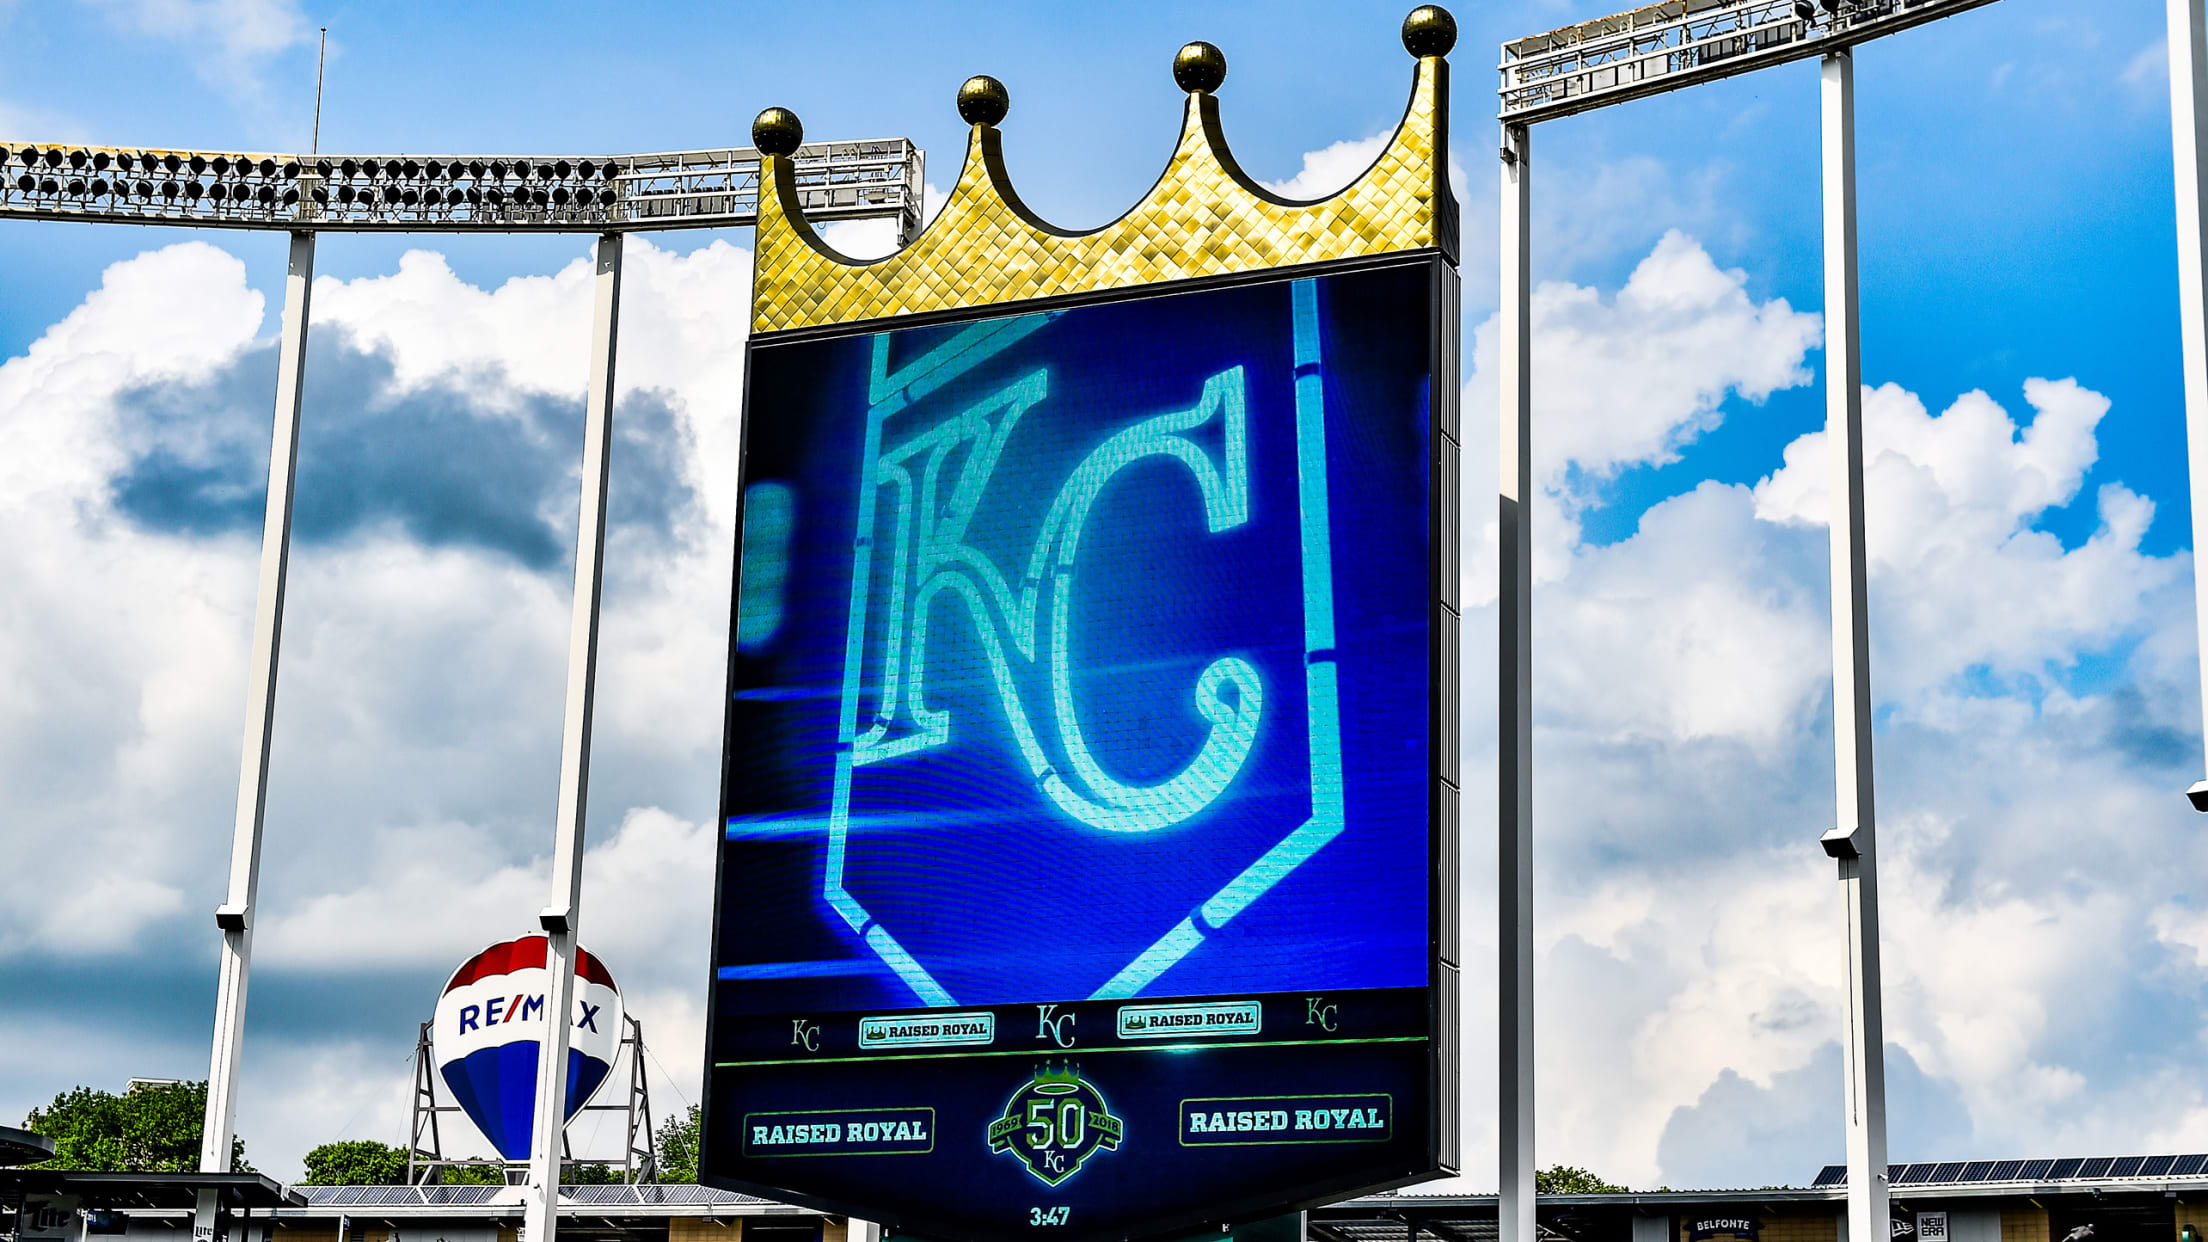 Royals rock Rodón, Witt homers to join 30-30 club as KC rolls to